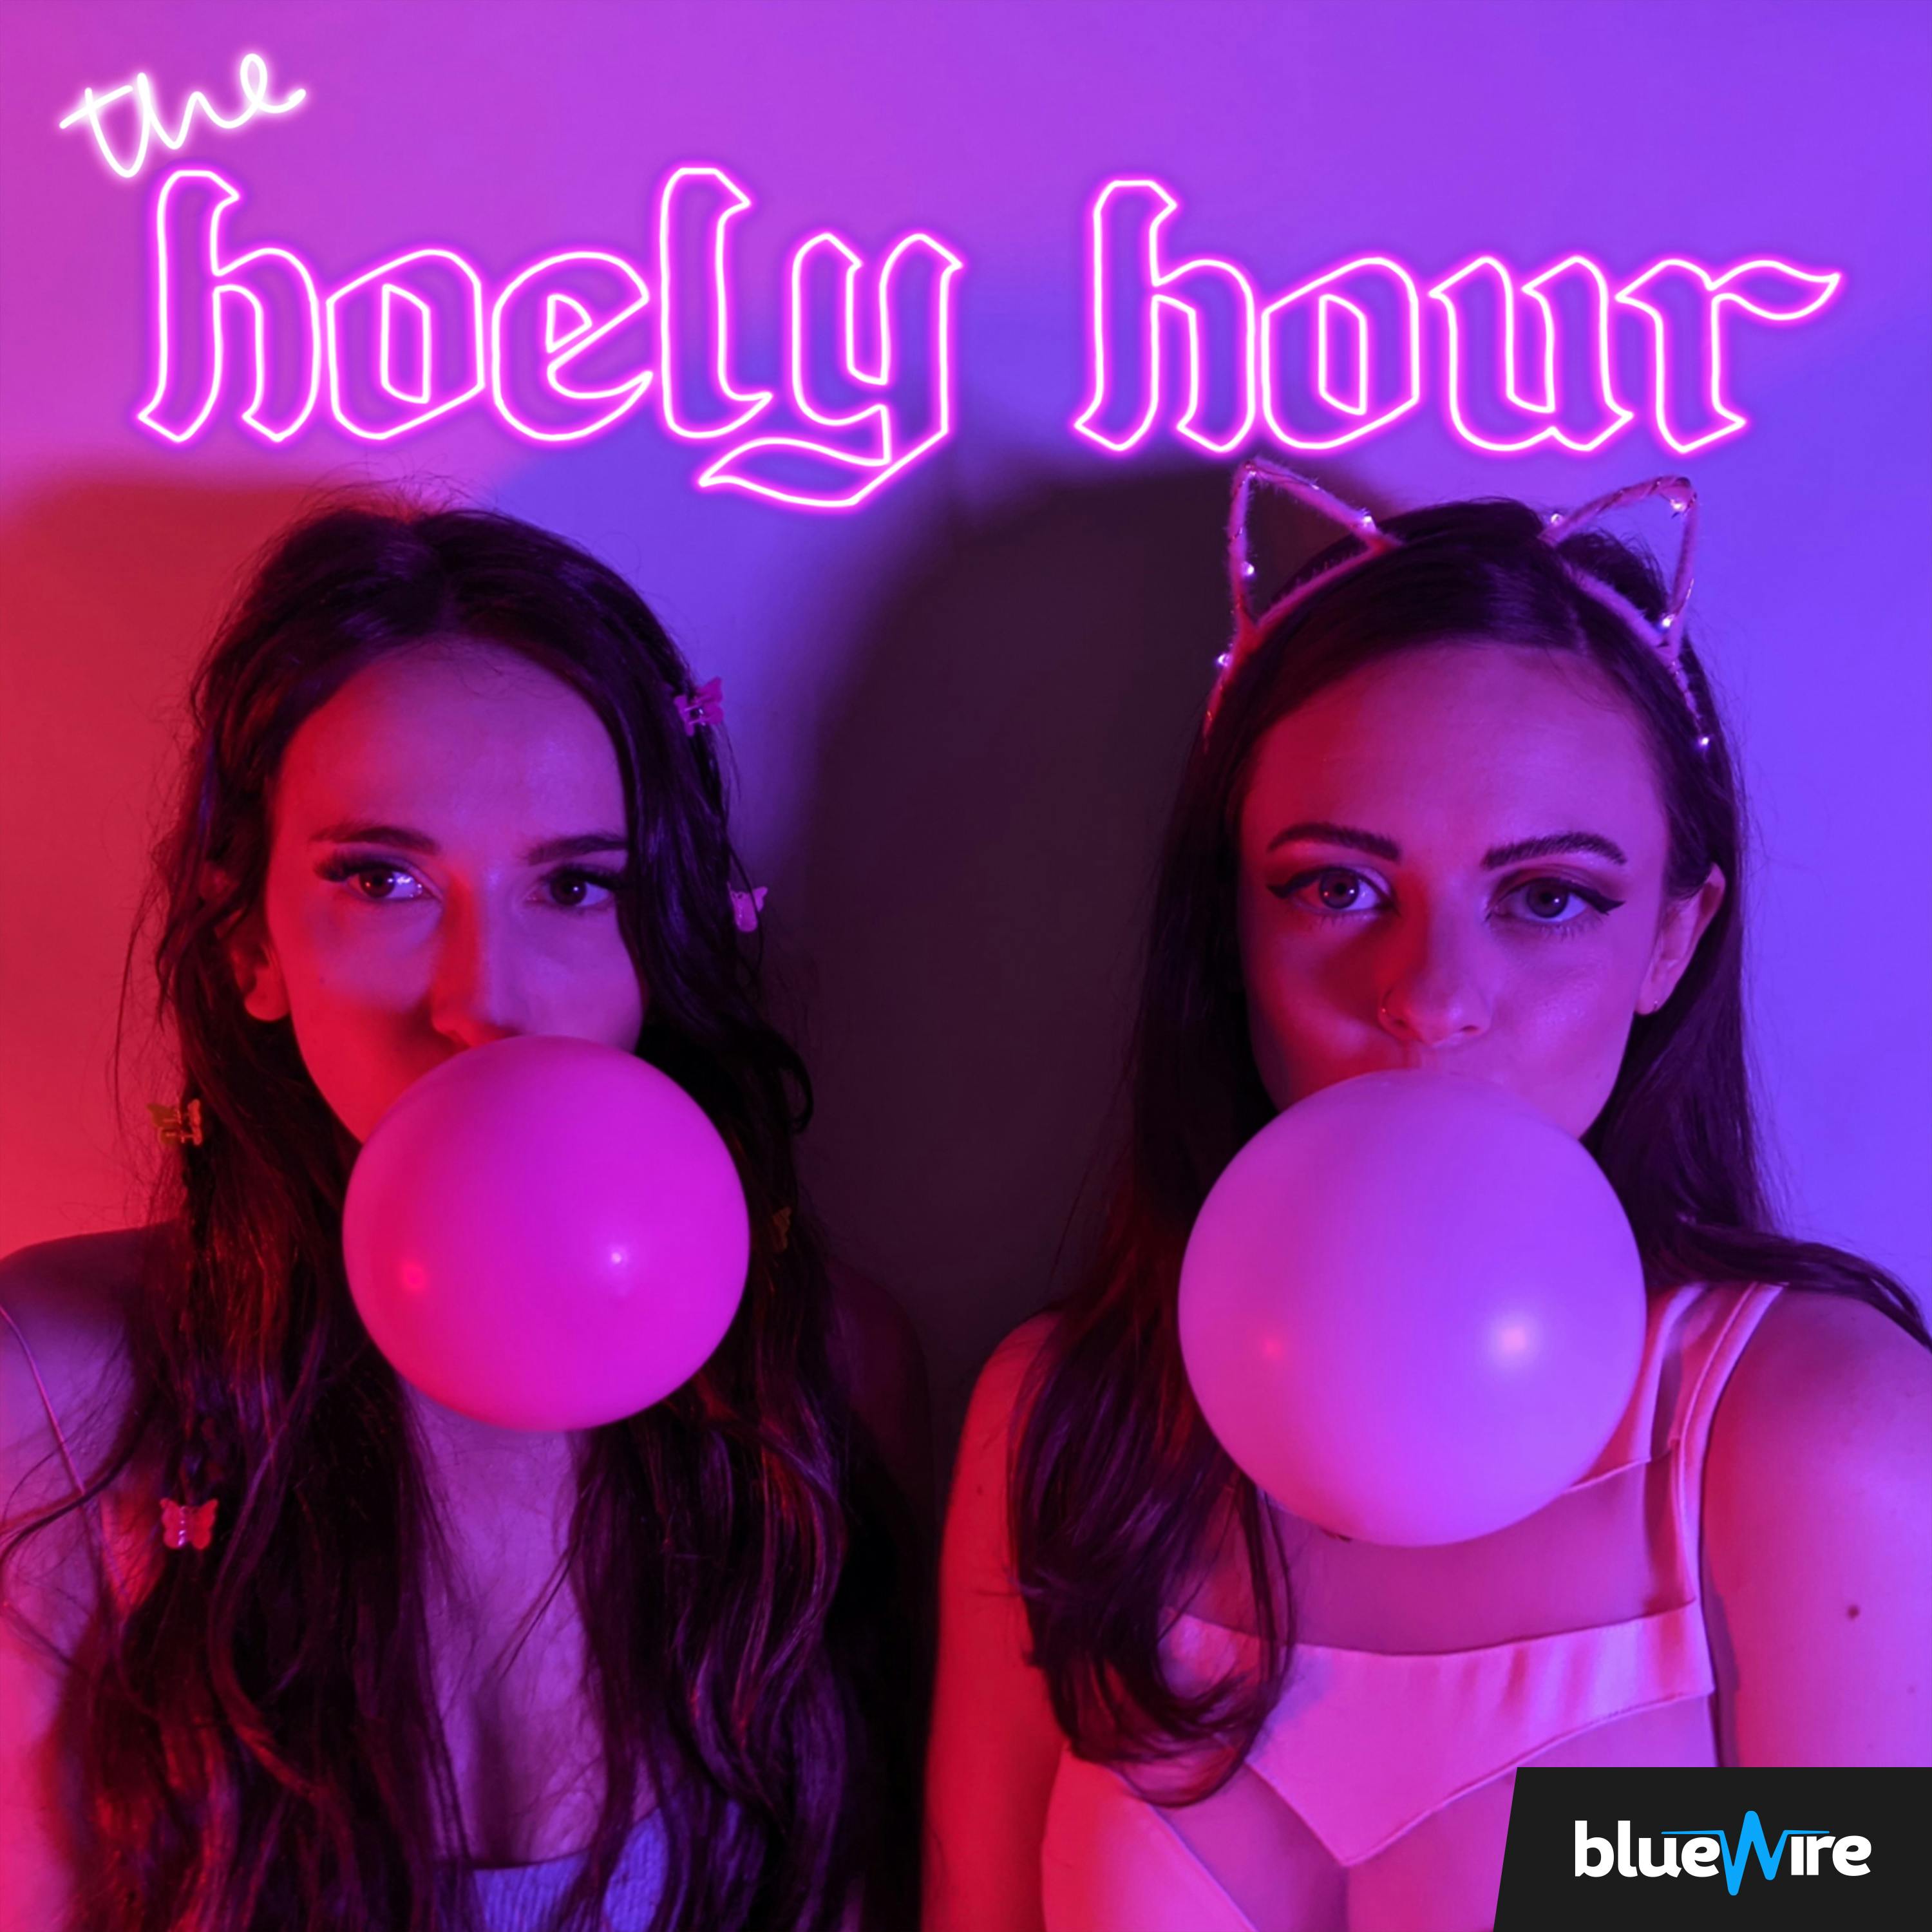 The Hoely Hour